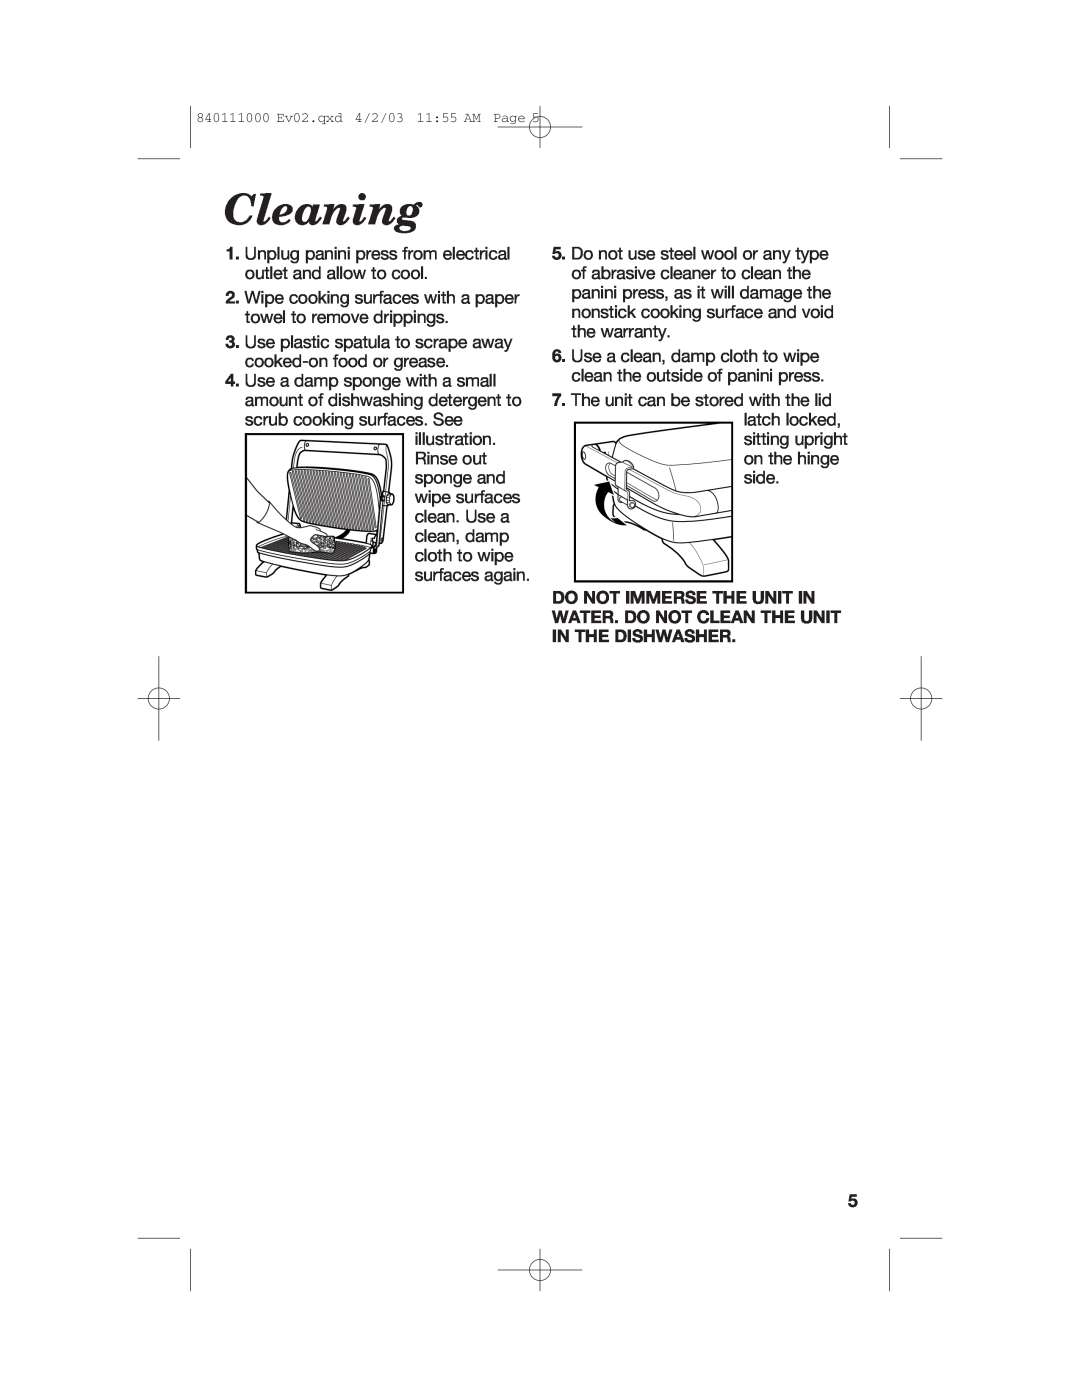 Hamilton Beach 25450 operating instructions Cleaning 